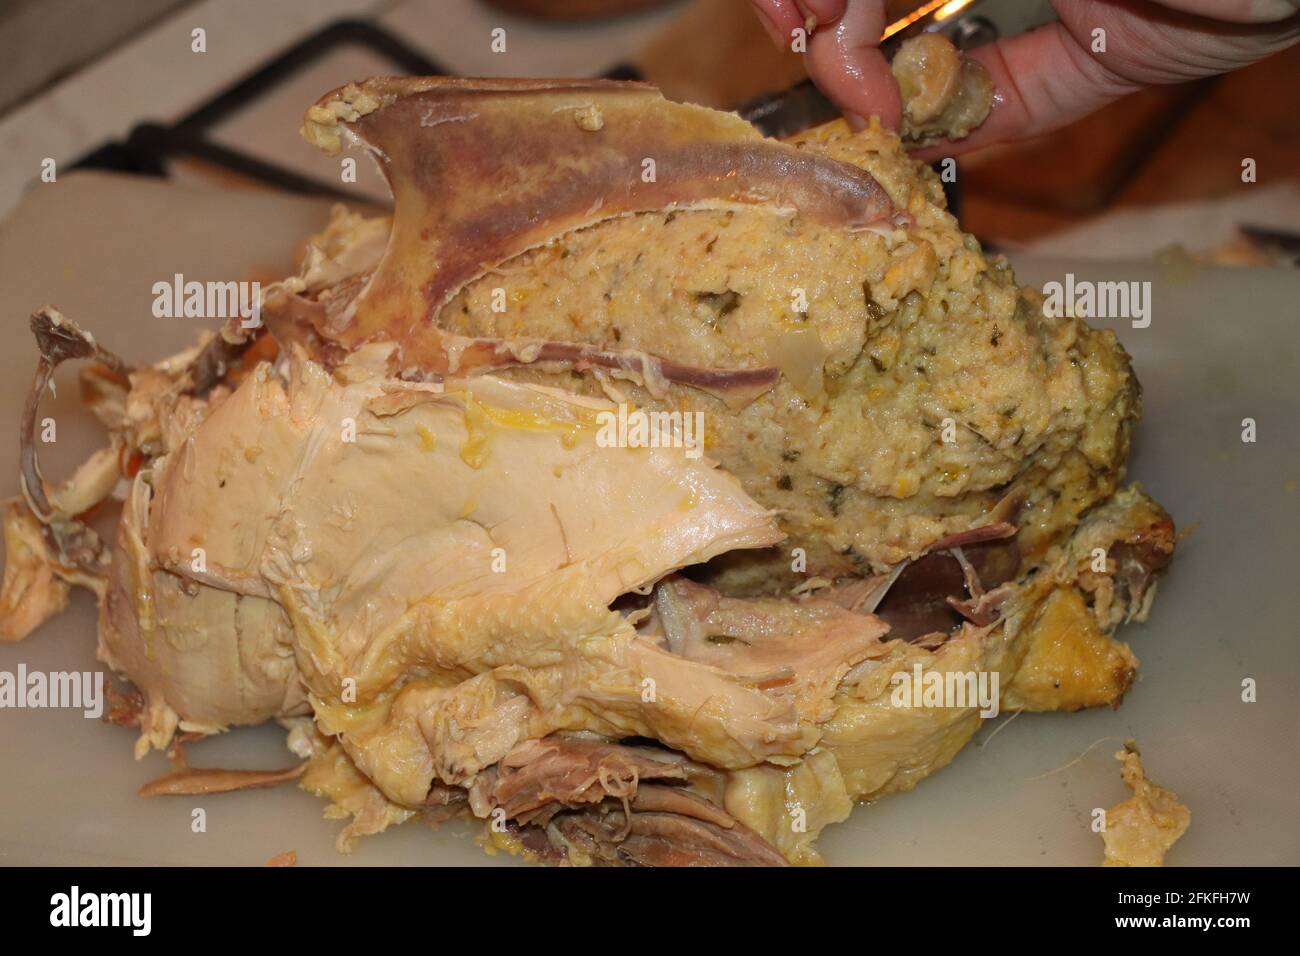 homemade stuffed capon on wooden cutting board Stock Photo